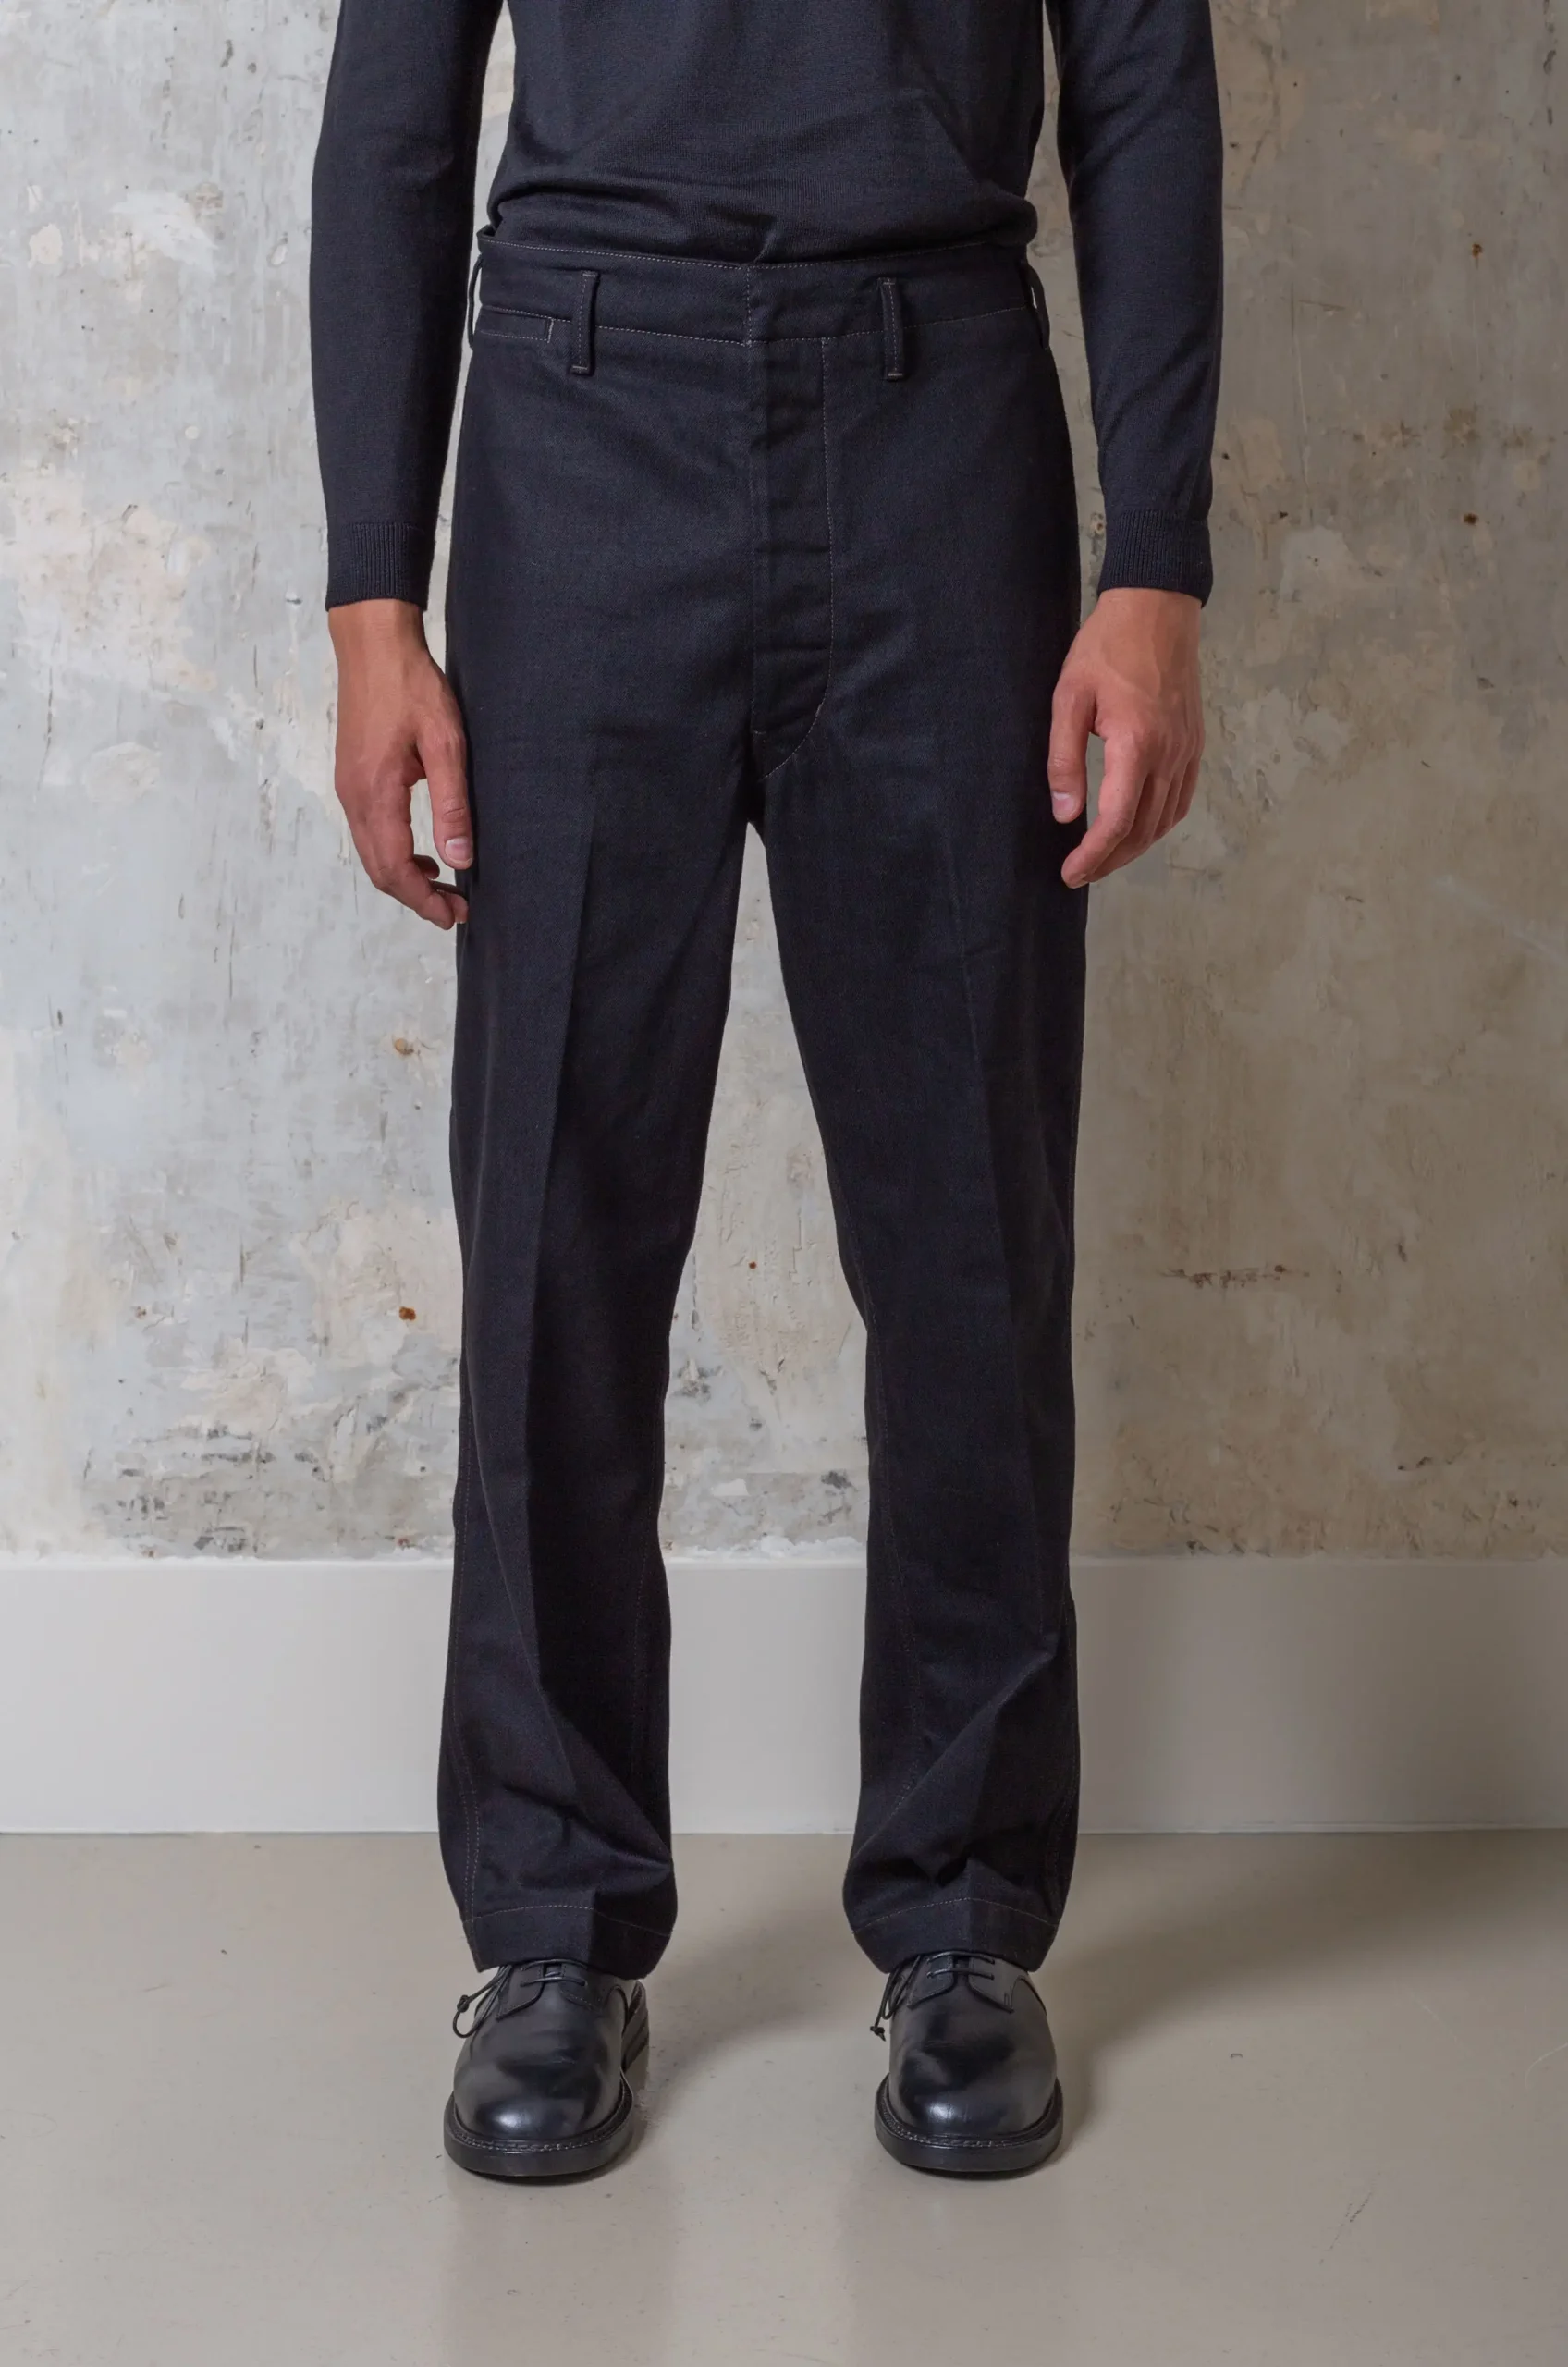 Lemaire - Maxi Chino - Black